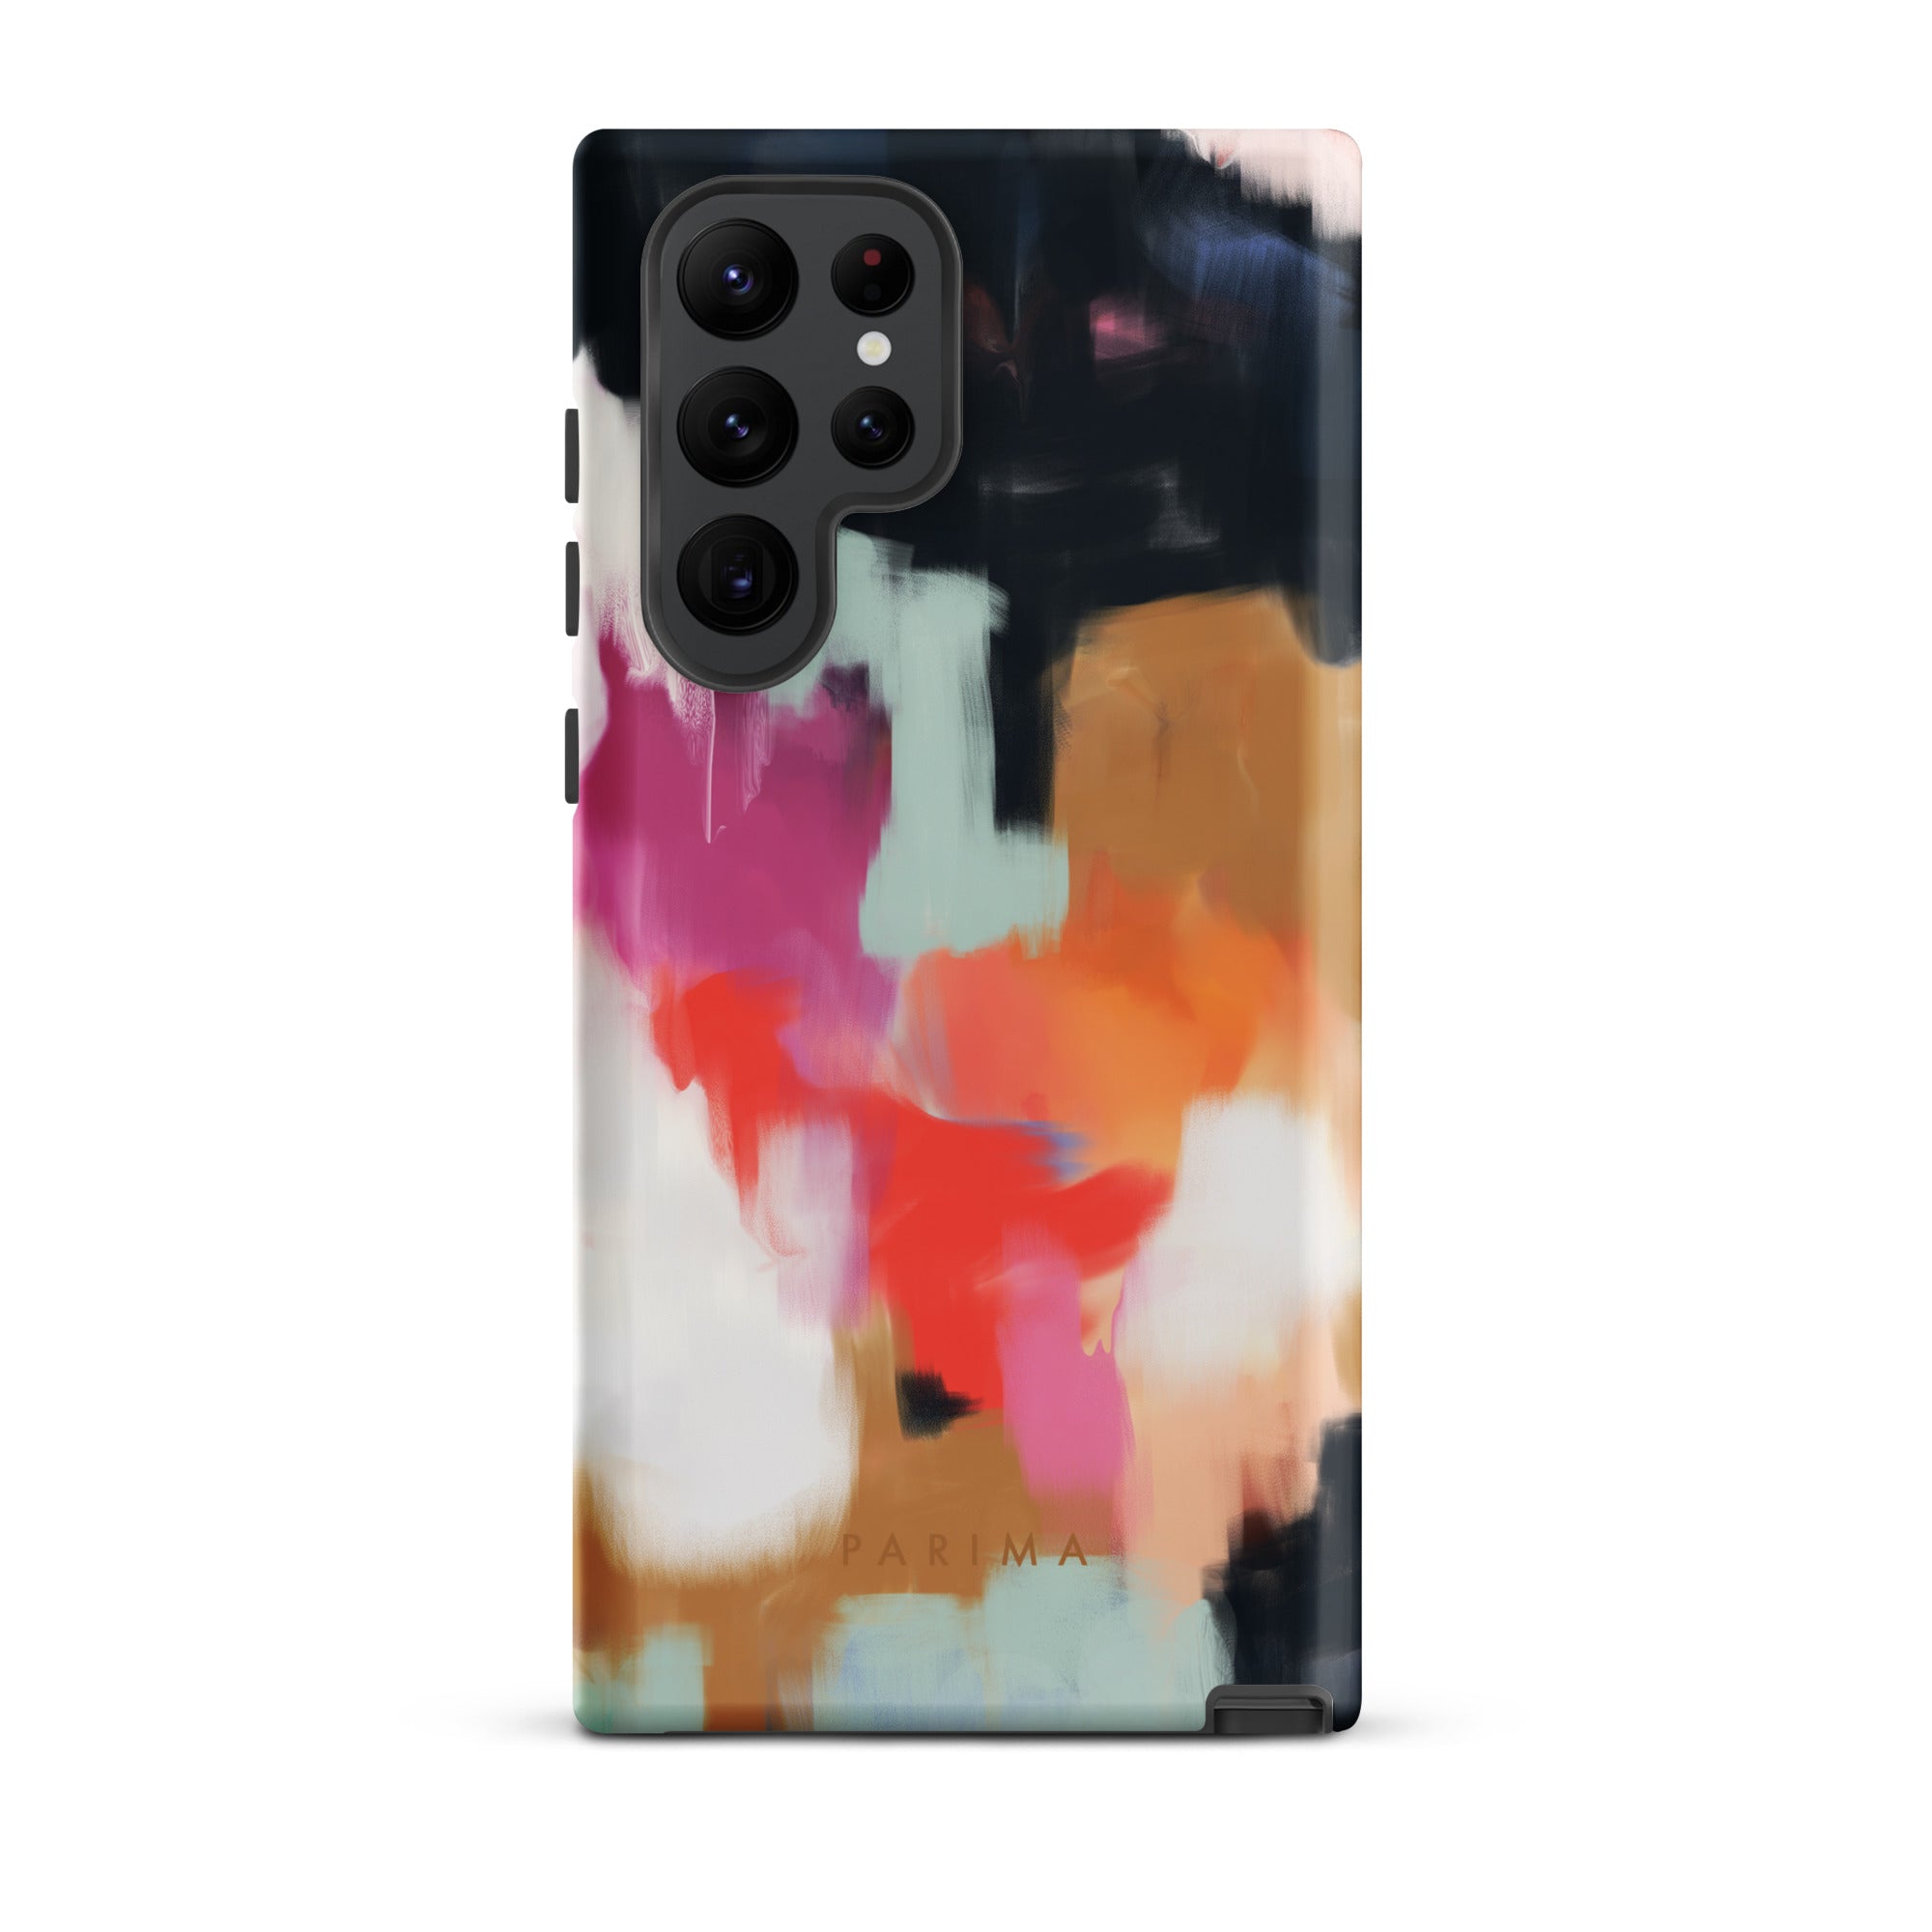 Ruthie, blue and pink abstract art on Samsung Galaxy S22 Ultra tough case by Parima Studio